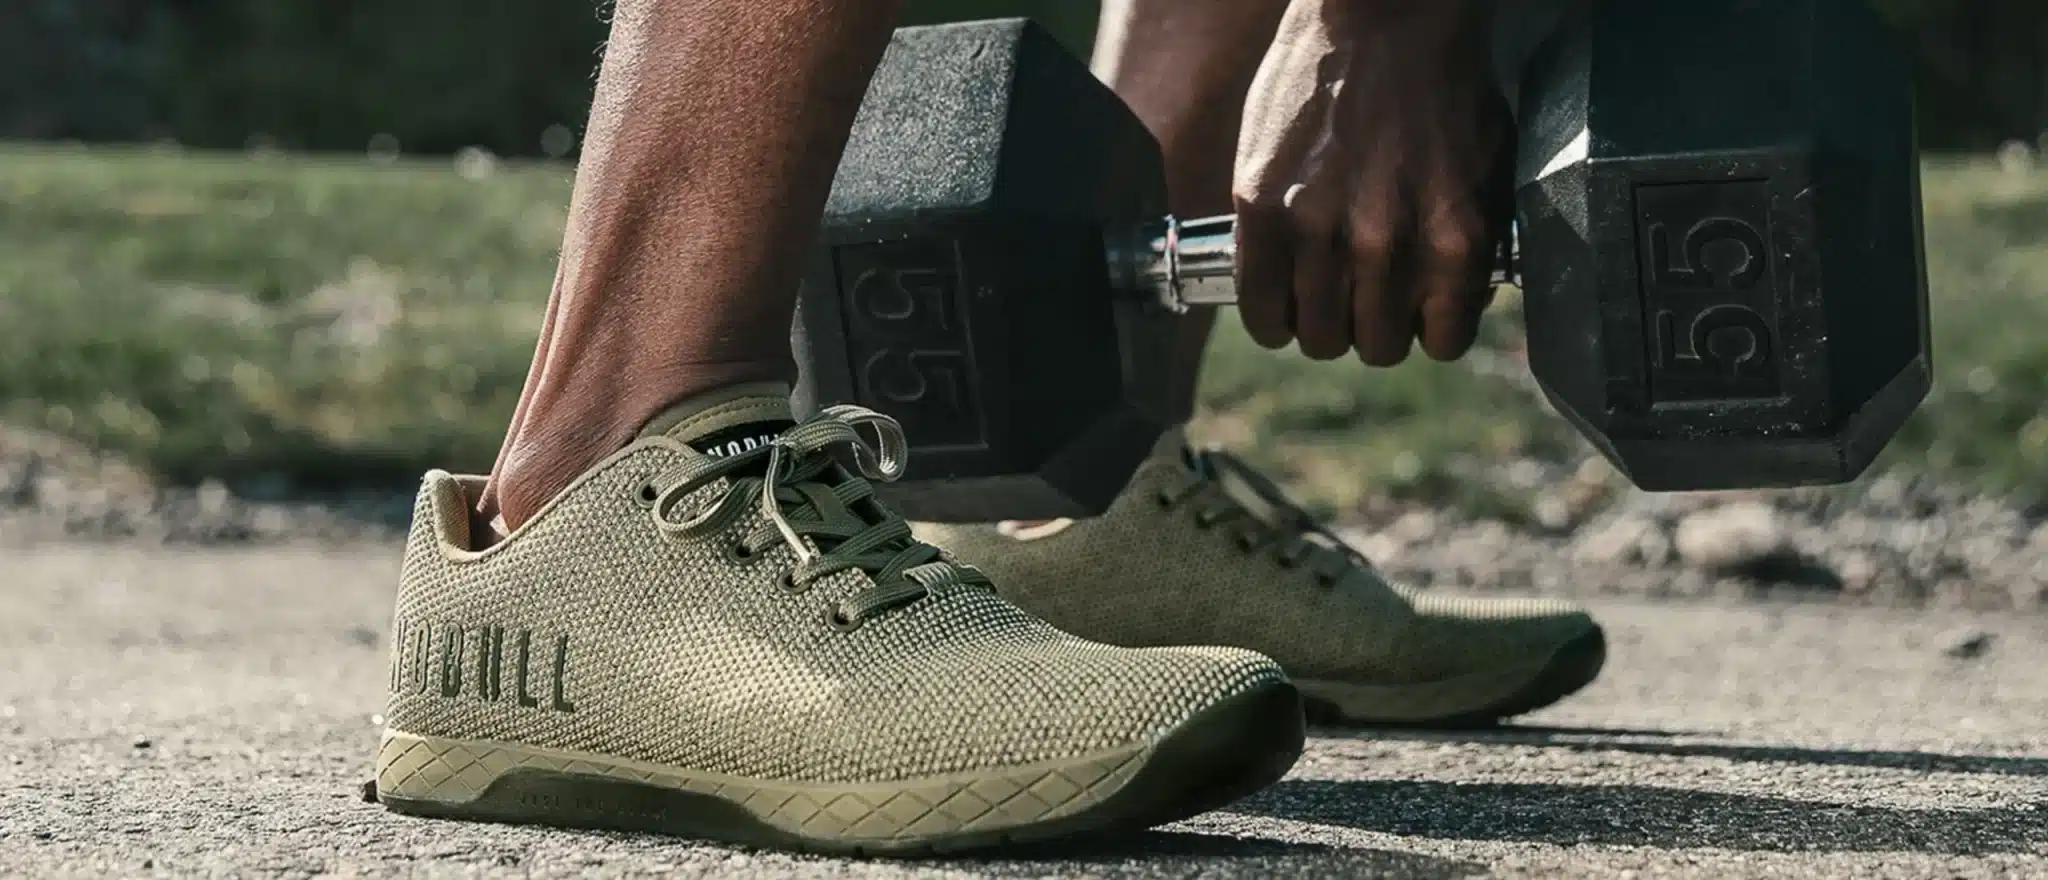 NoBull Shoes Review: Are These CrossFit-Famous Trainers Worth the Money?